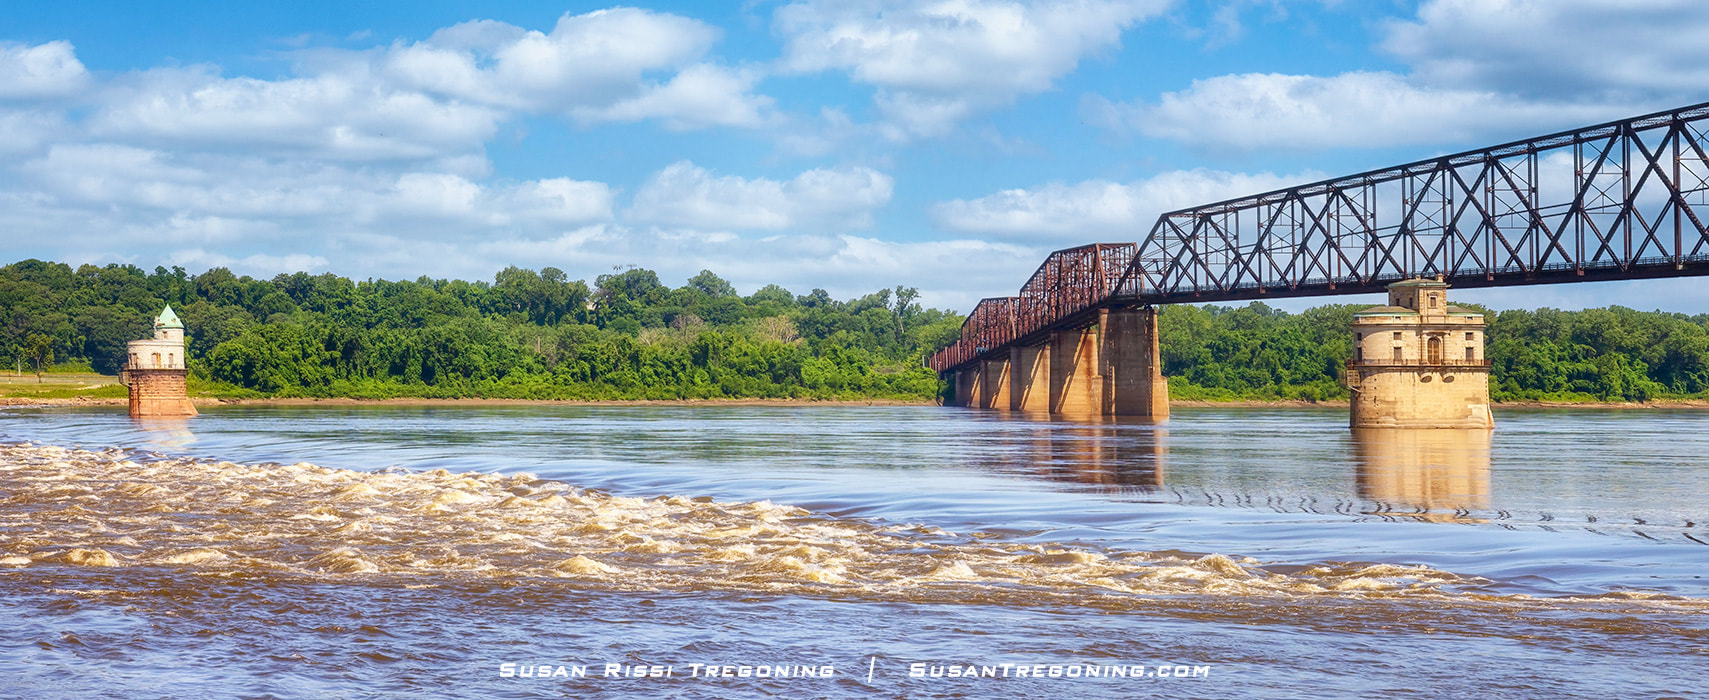 The Mississippi River is seen below the Old Chain of Rocks Bridge near the Chain of Rocks rapids and historic St Louis water intake towers. After the low water dam was installed, the Chain of Rocks shoal can no longer be seen unless the river level is extremely low.